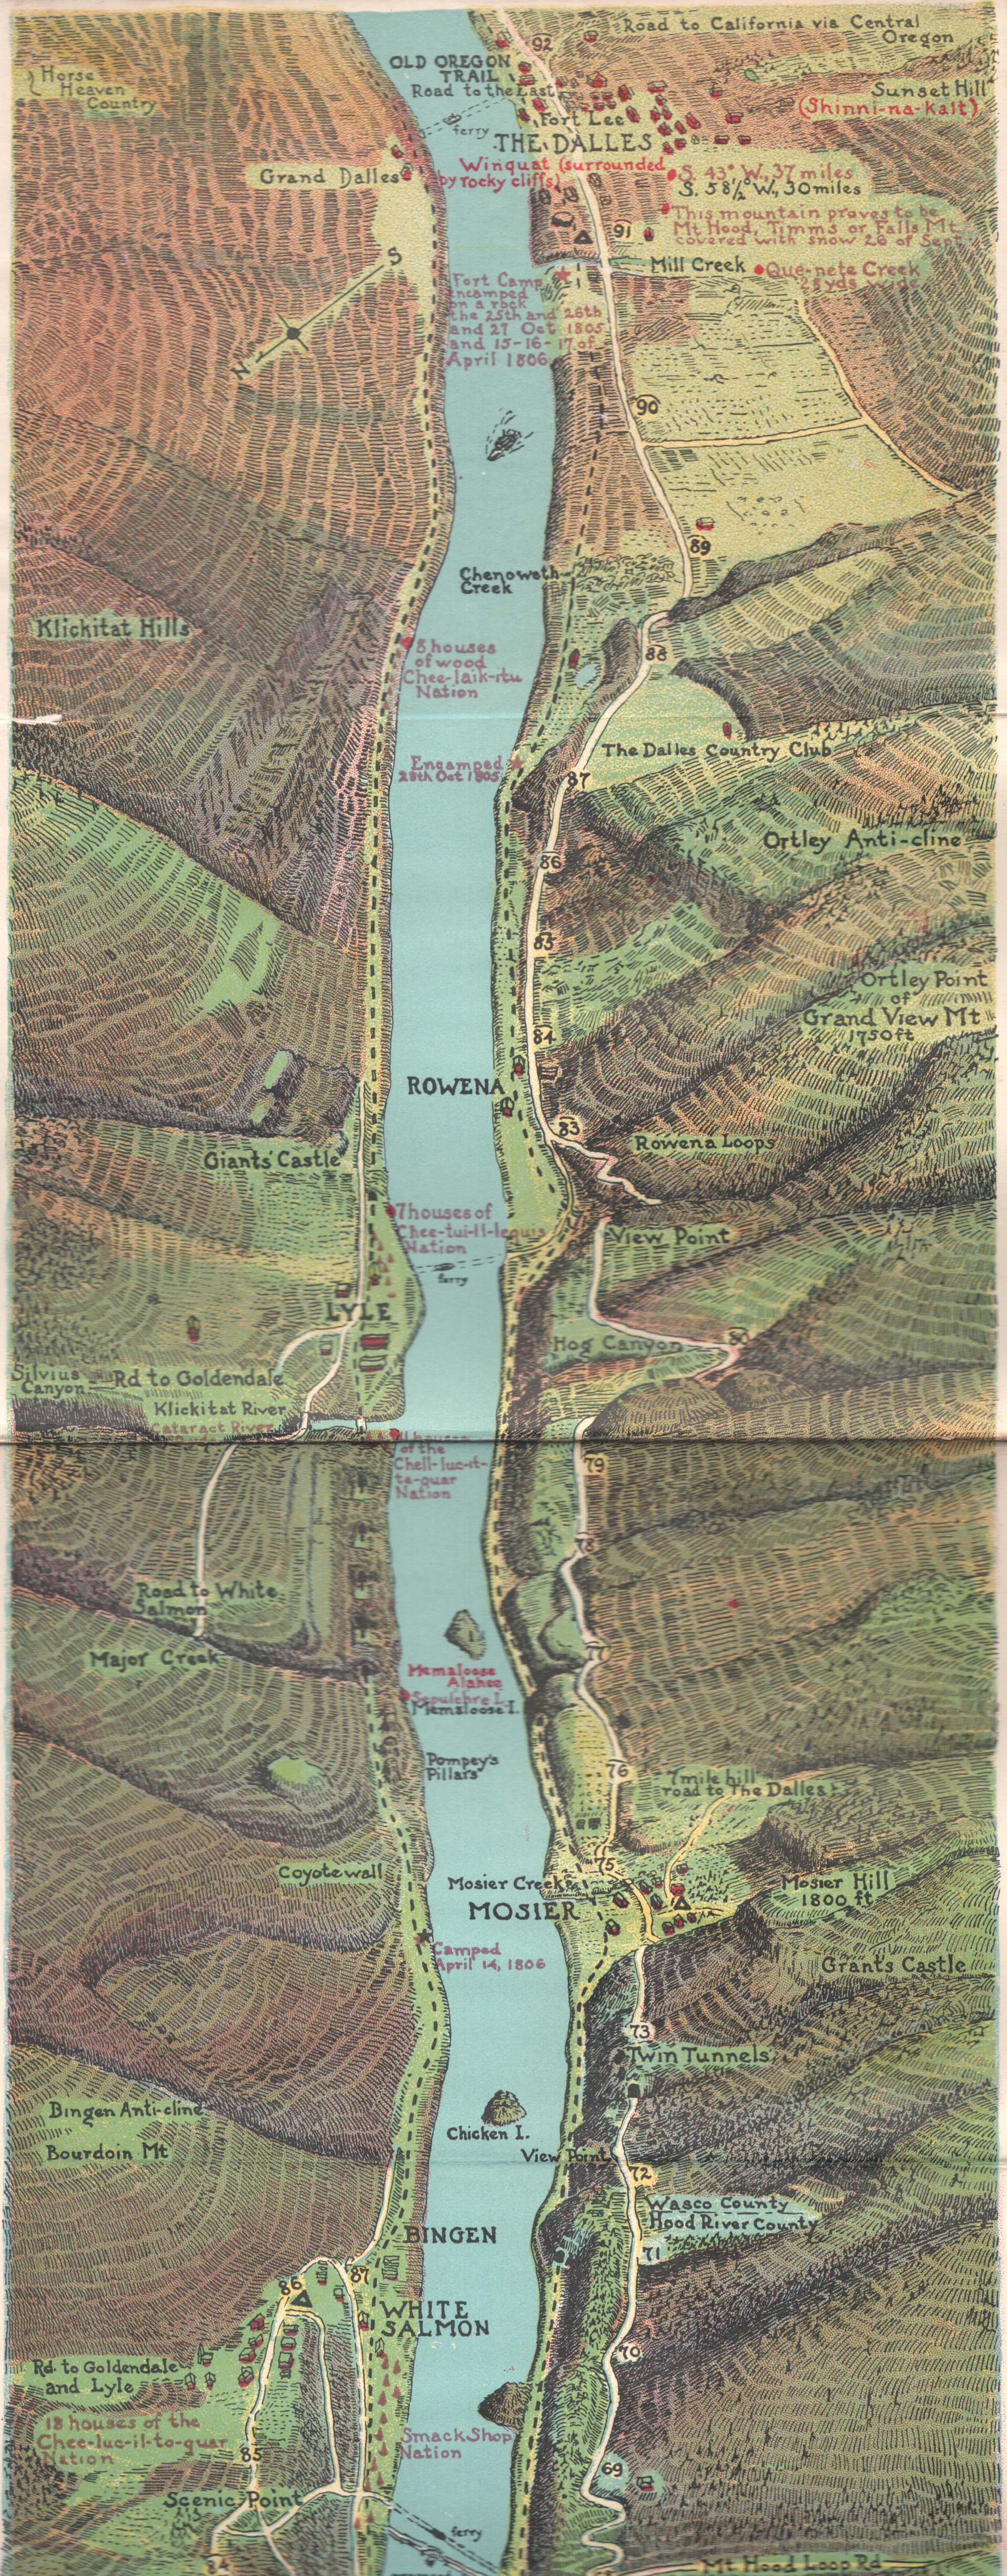 Detail of Dalles region from Oppenlander's map of the Columbia River, 1924.